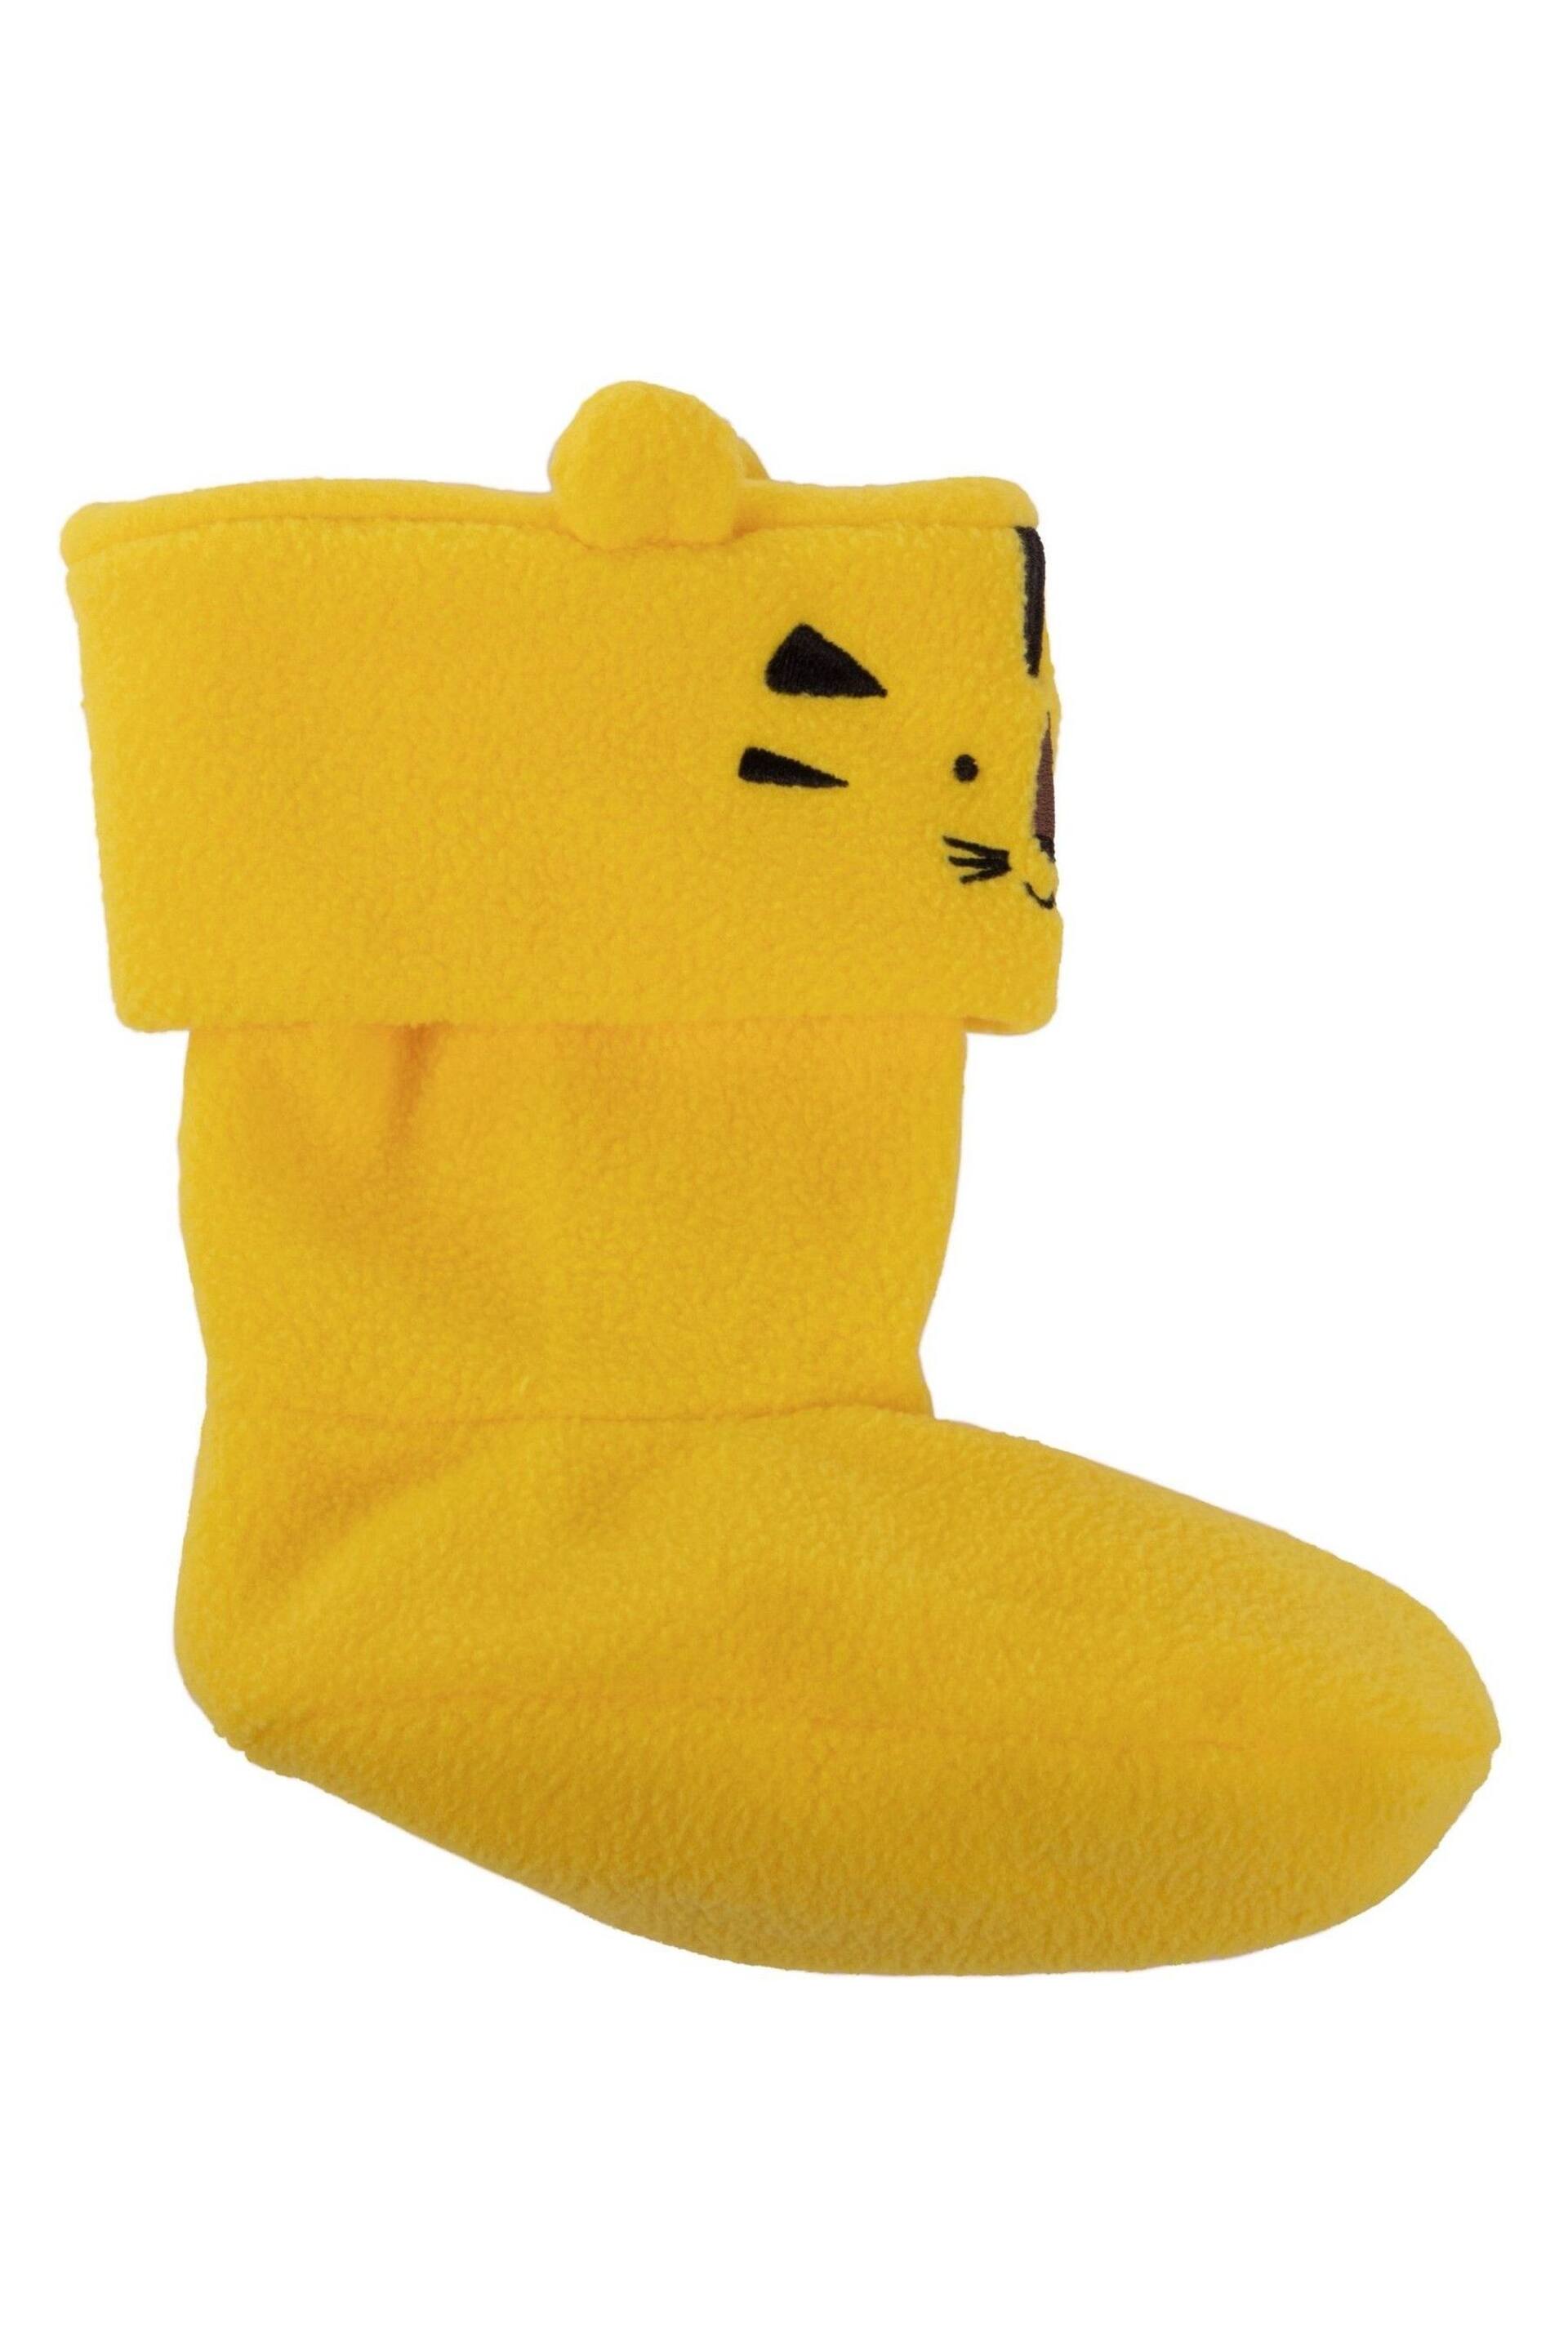 Totes Yellow Childrens Bunny Welly Liner Socks - Image 4 of 5